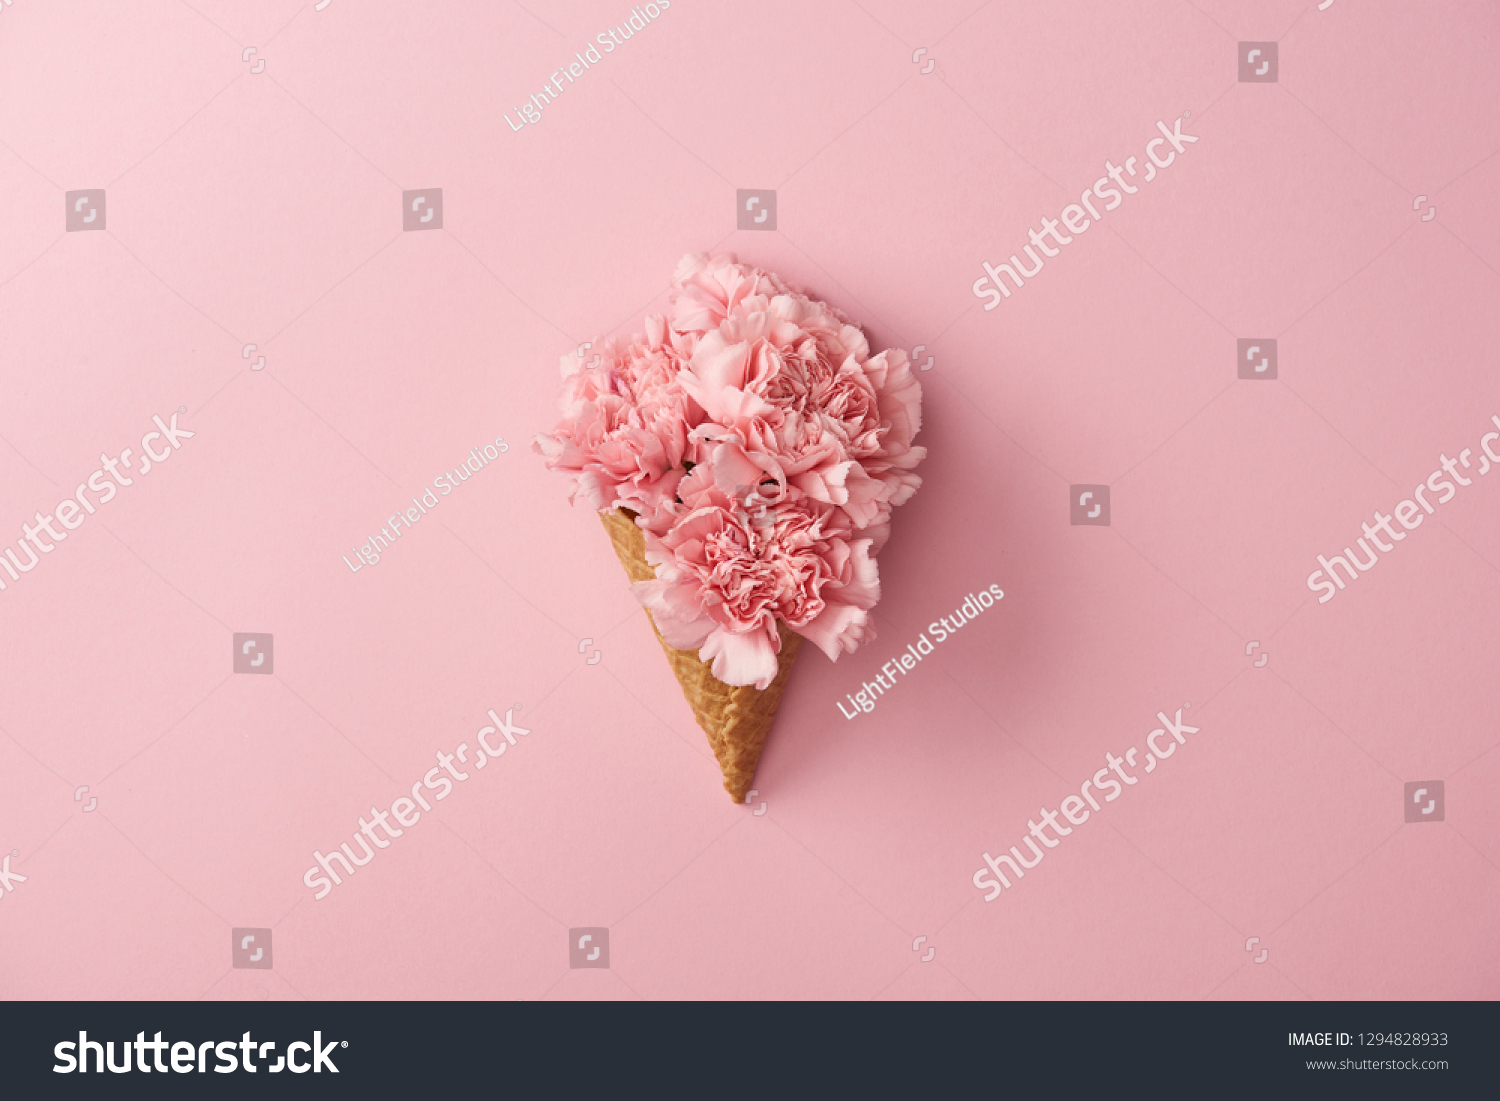 beautiful pink carnation flowers in waffle cone isolated on pink  #1294828933